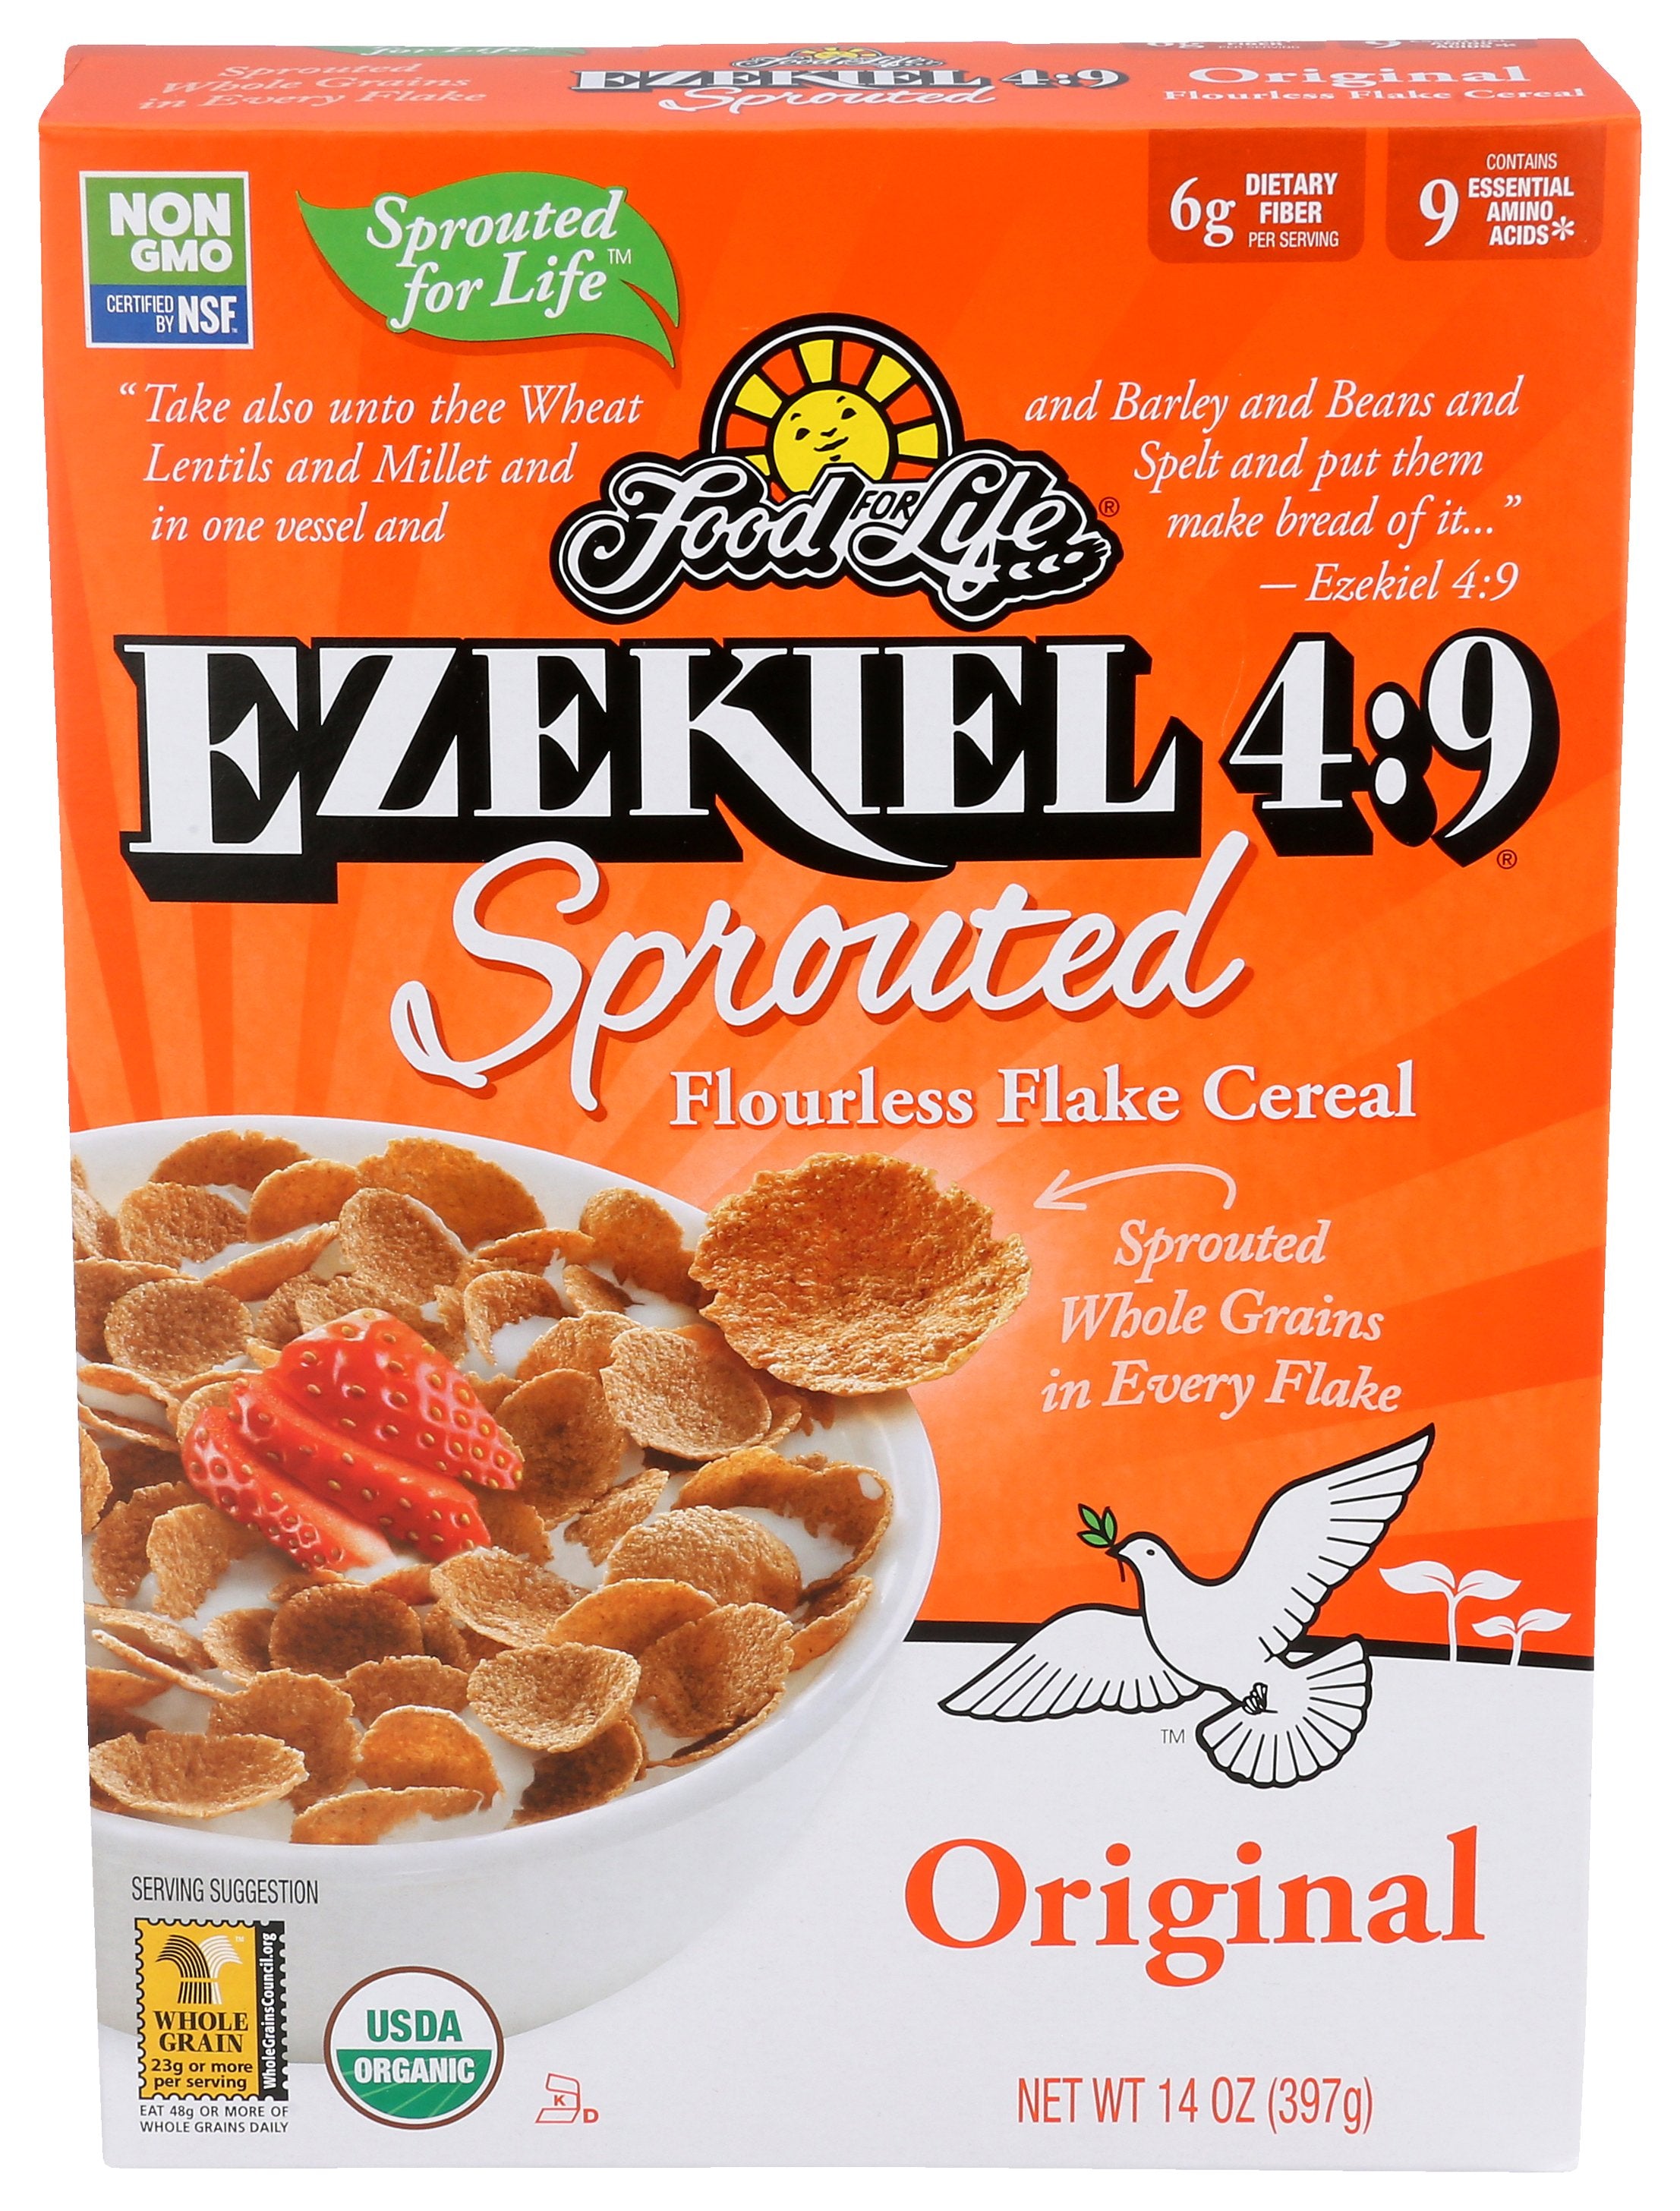 FOOD FOR LIFE CEREAL FLAKED SPRTD ORG - Case of 6